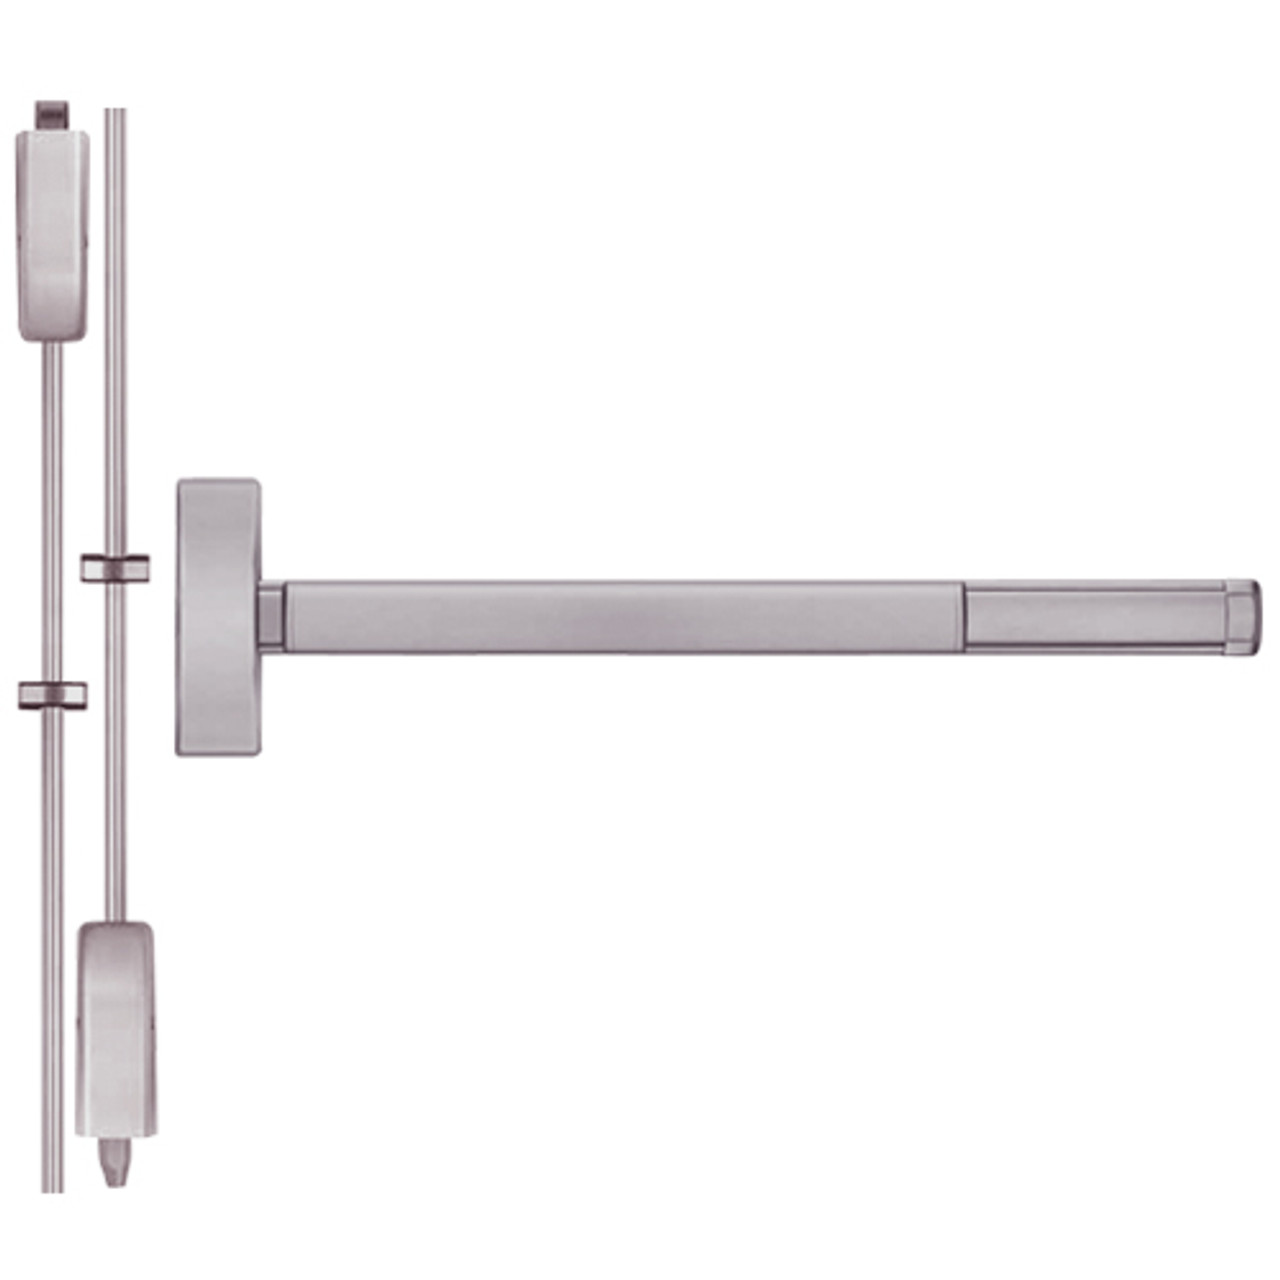 DE2202LBR-630-36 PHI 2200 Series Non Fire Rated Apex Surface Vertical Rod Device with Delayed Egress Prepped for Dummy Trim in Satin Stainless Steel Finish